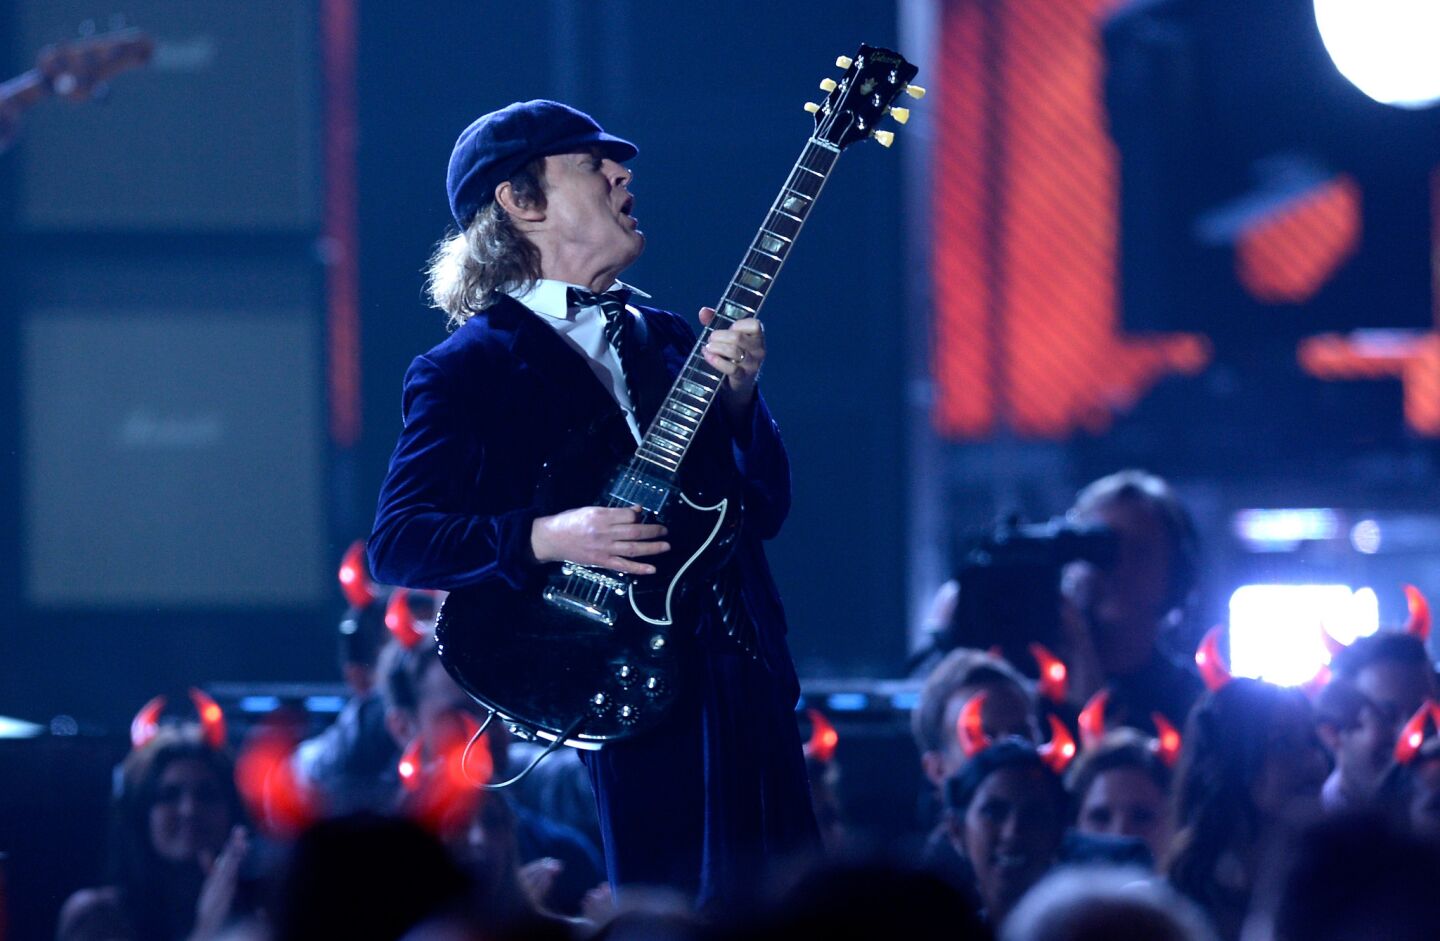 AC/DC opens the show